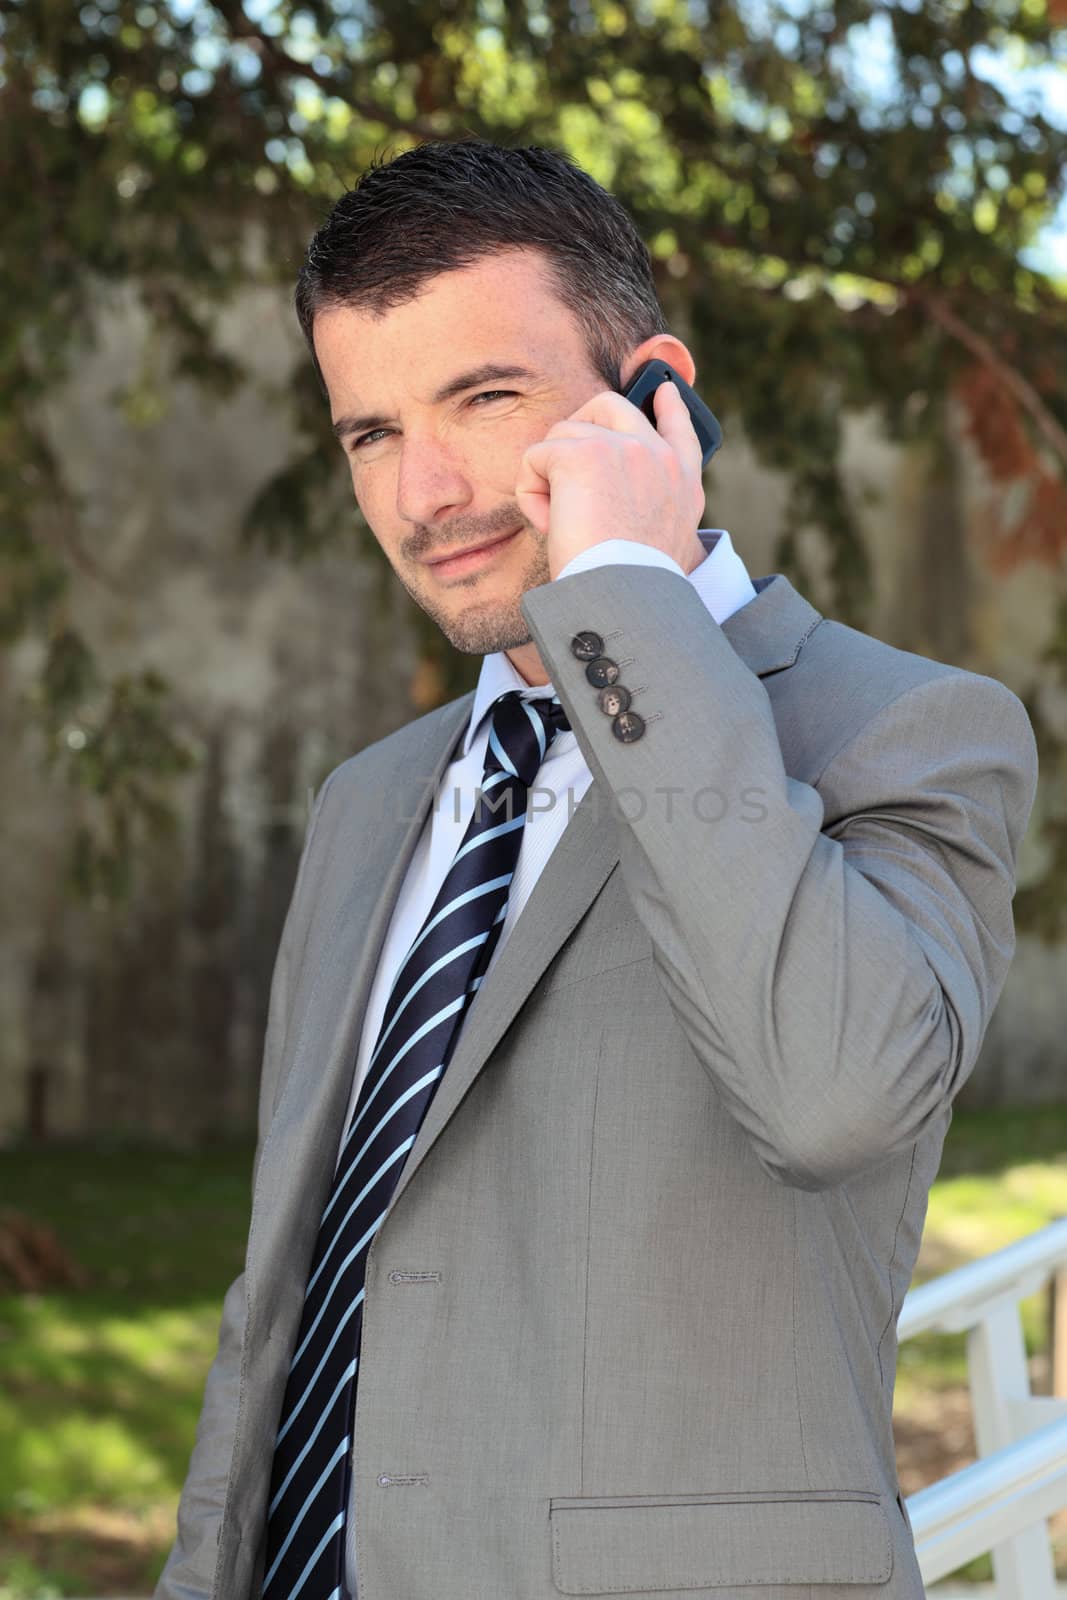 businessman on the phone outdoor in spring